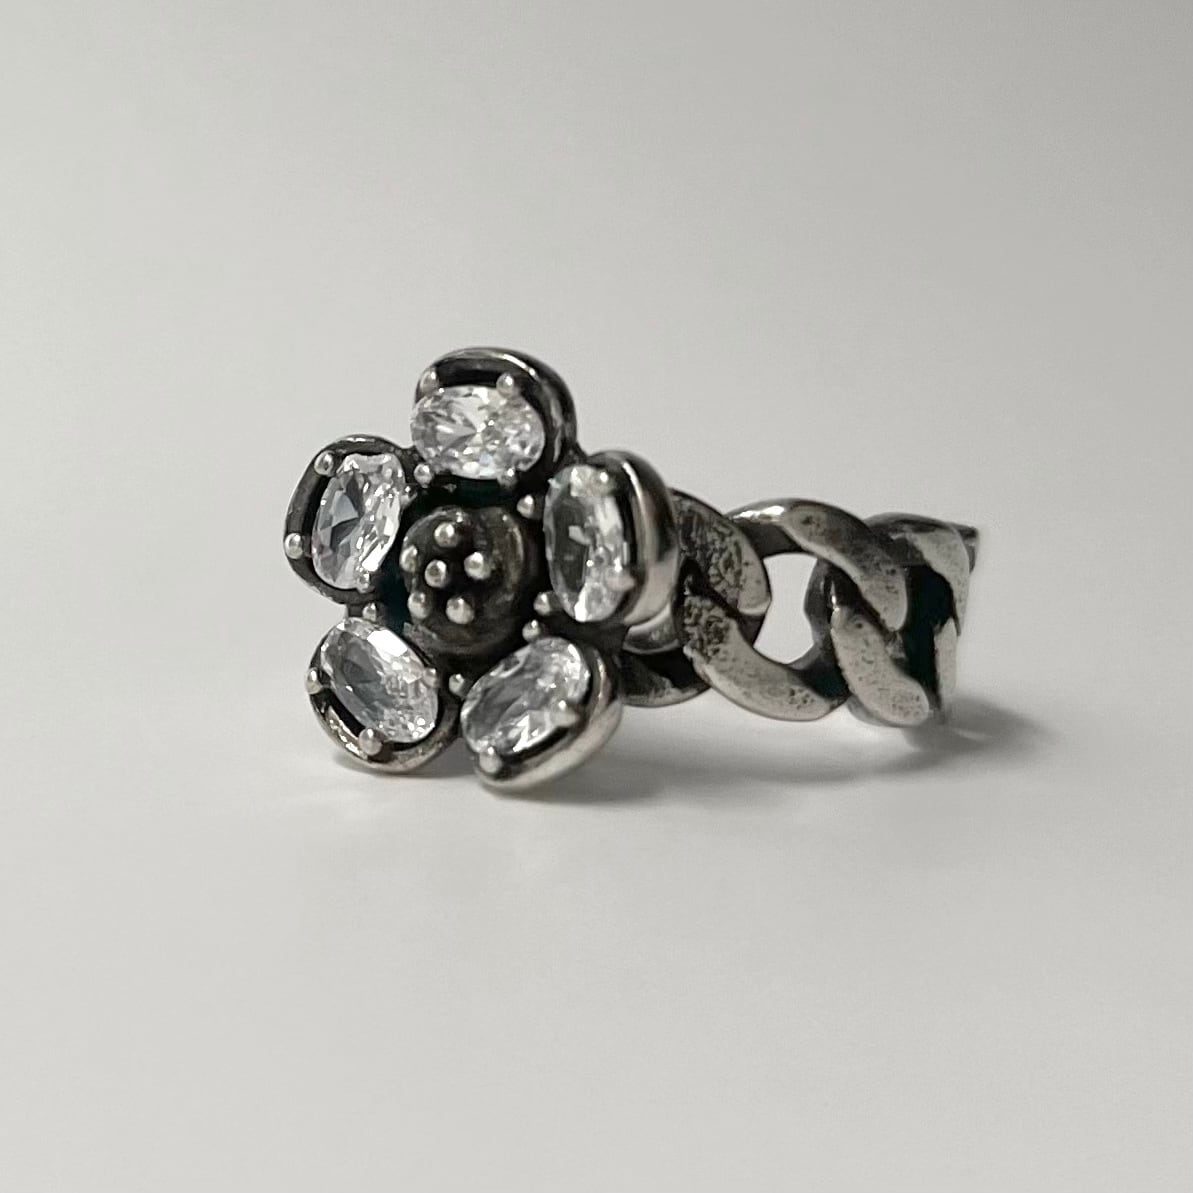 Silver925 Vintage Bijou Flower Ring | Not On Sale -small items for 